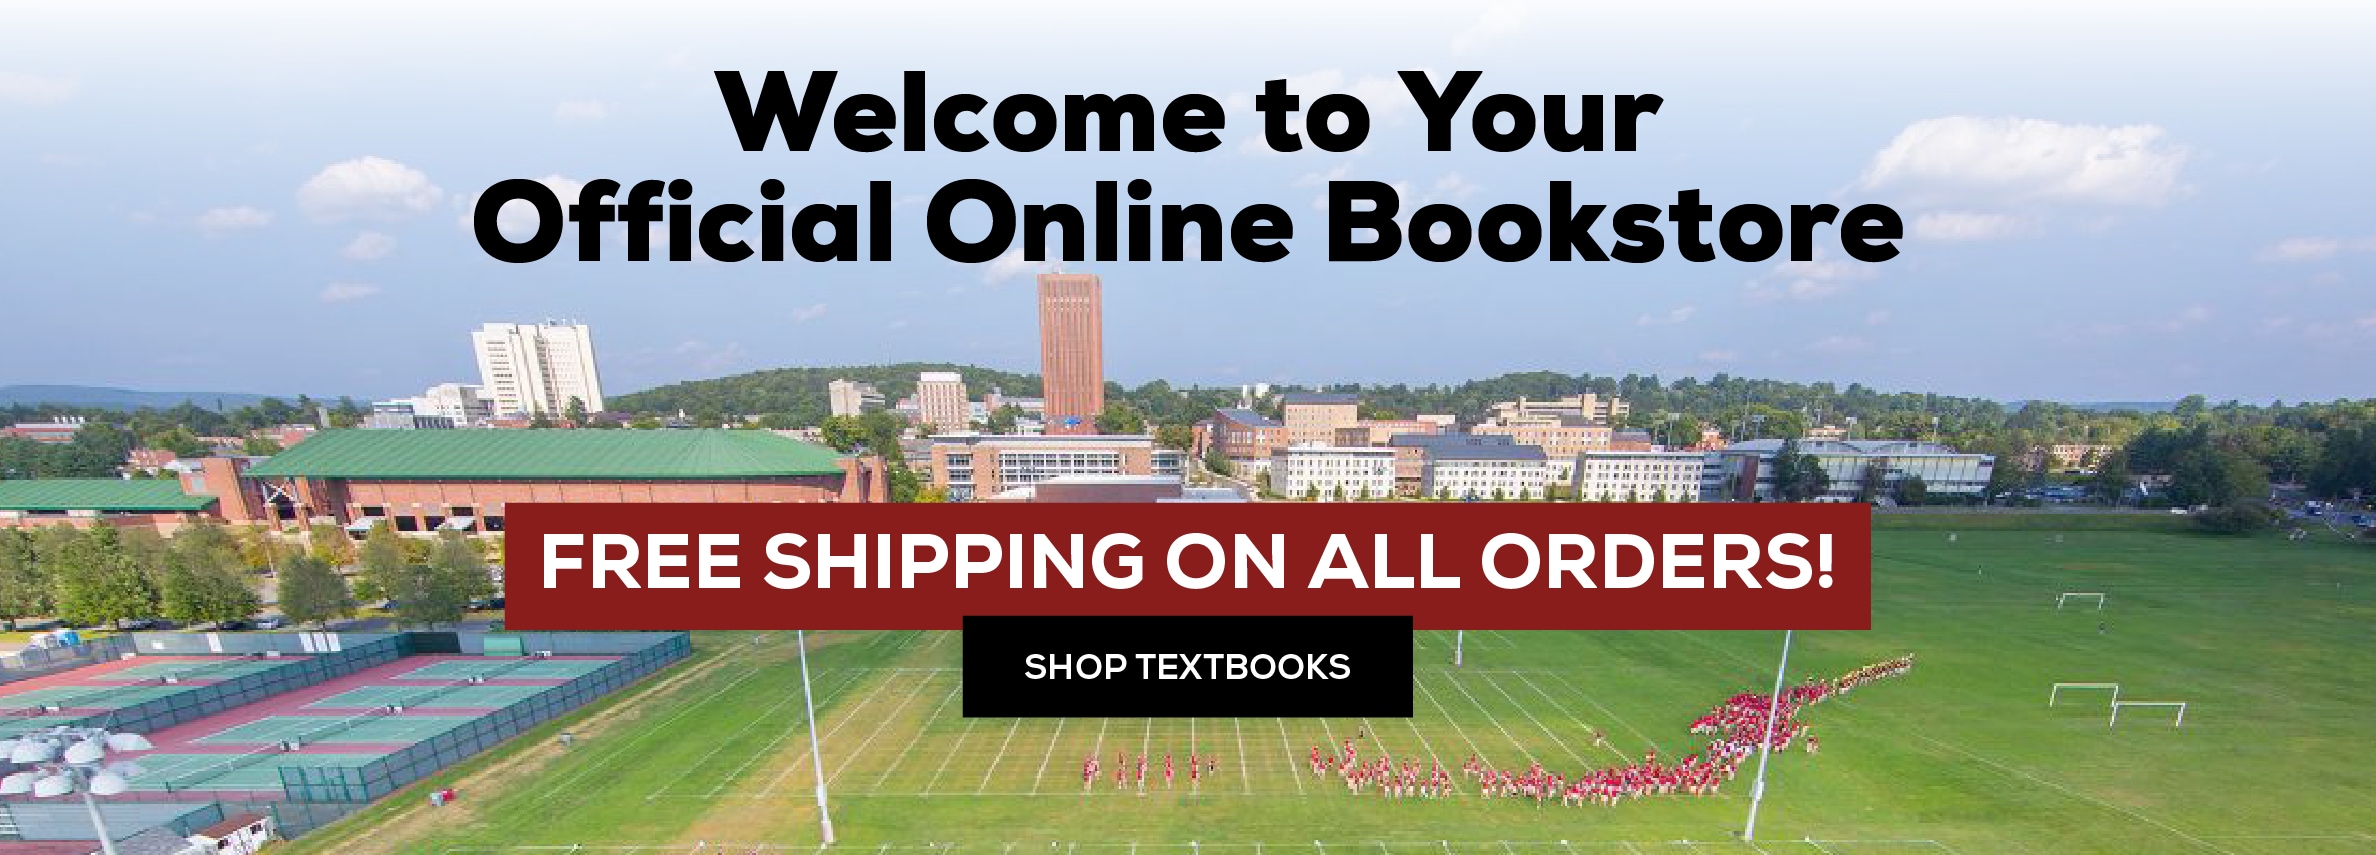 Welcome to your official Online bookstore. Free shipping on all orders! Shop textbooks